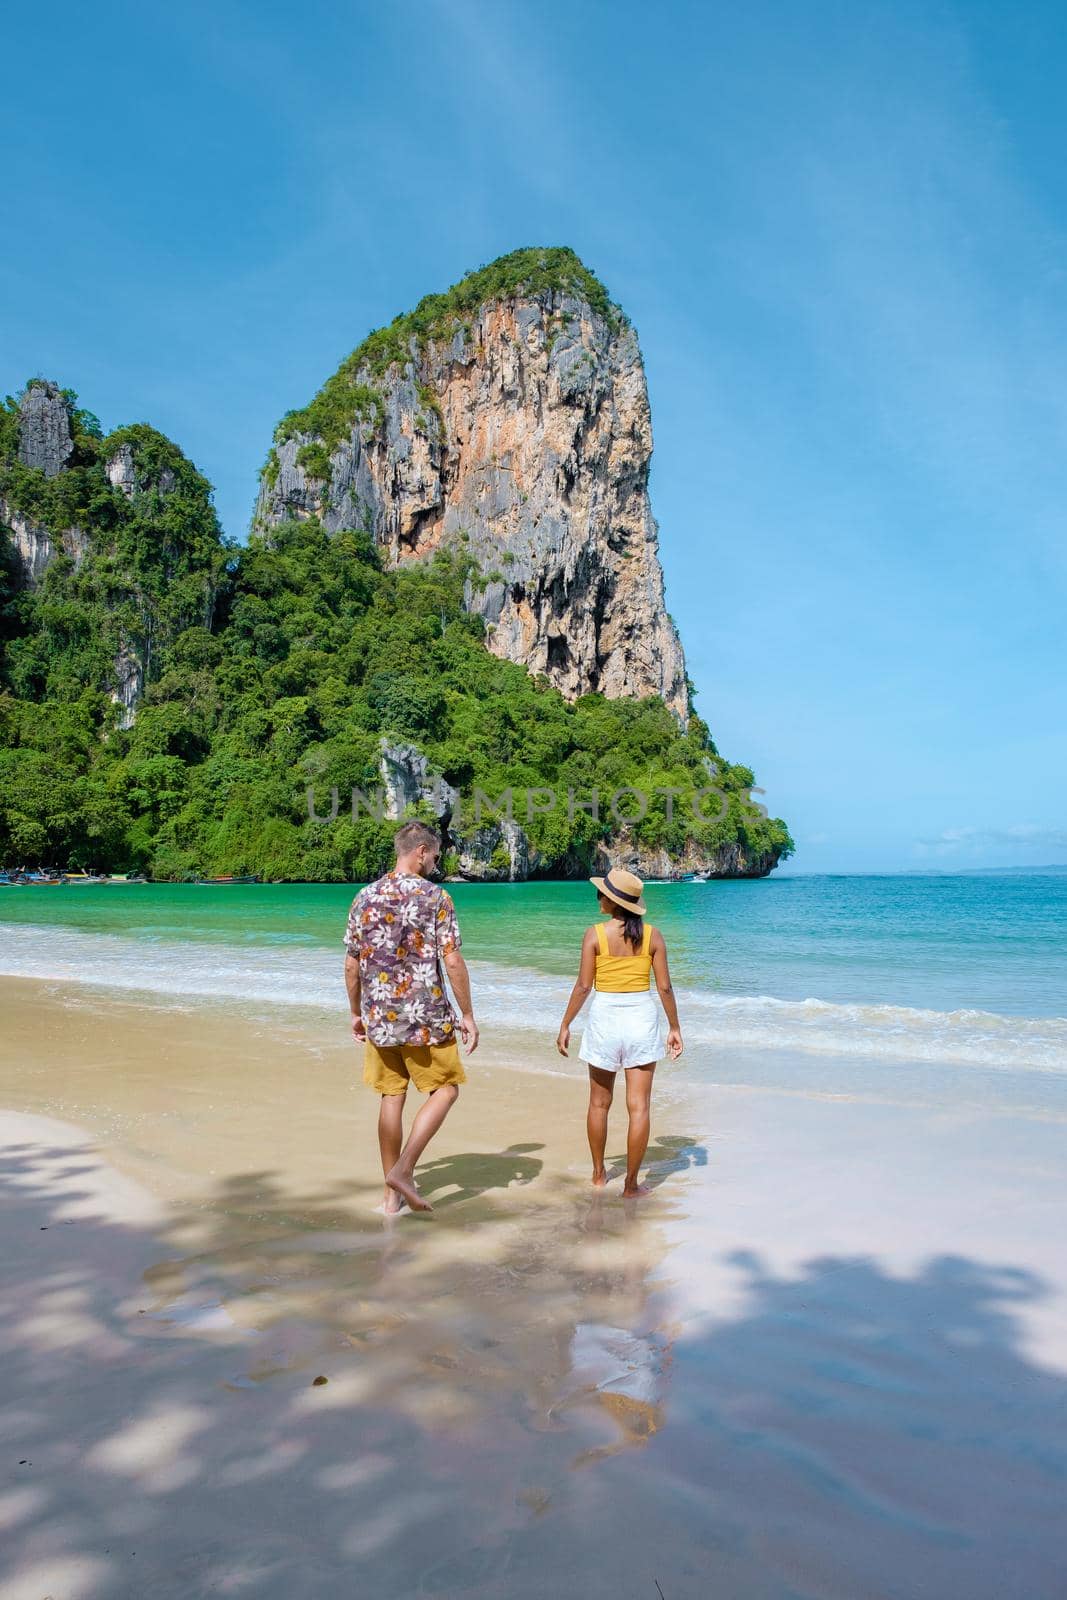 Railay beach Krabi Thailand, tropical beach of Railay Krabi, couple men and woman on the beach, Panoramic view of idyllic Railay Beach in Thailand with a traditional long boat by fokkebok